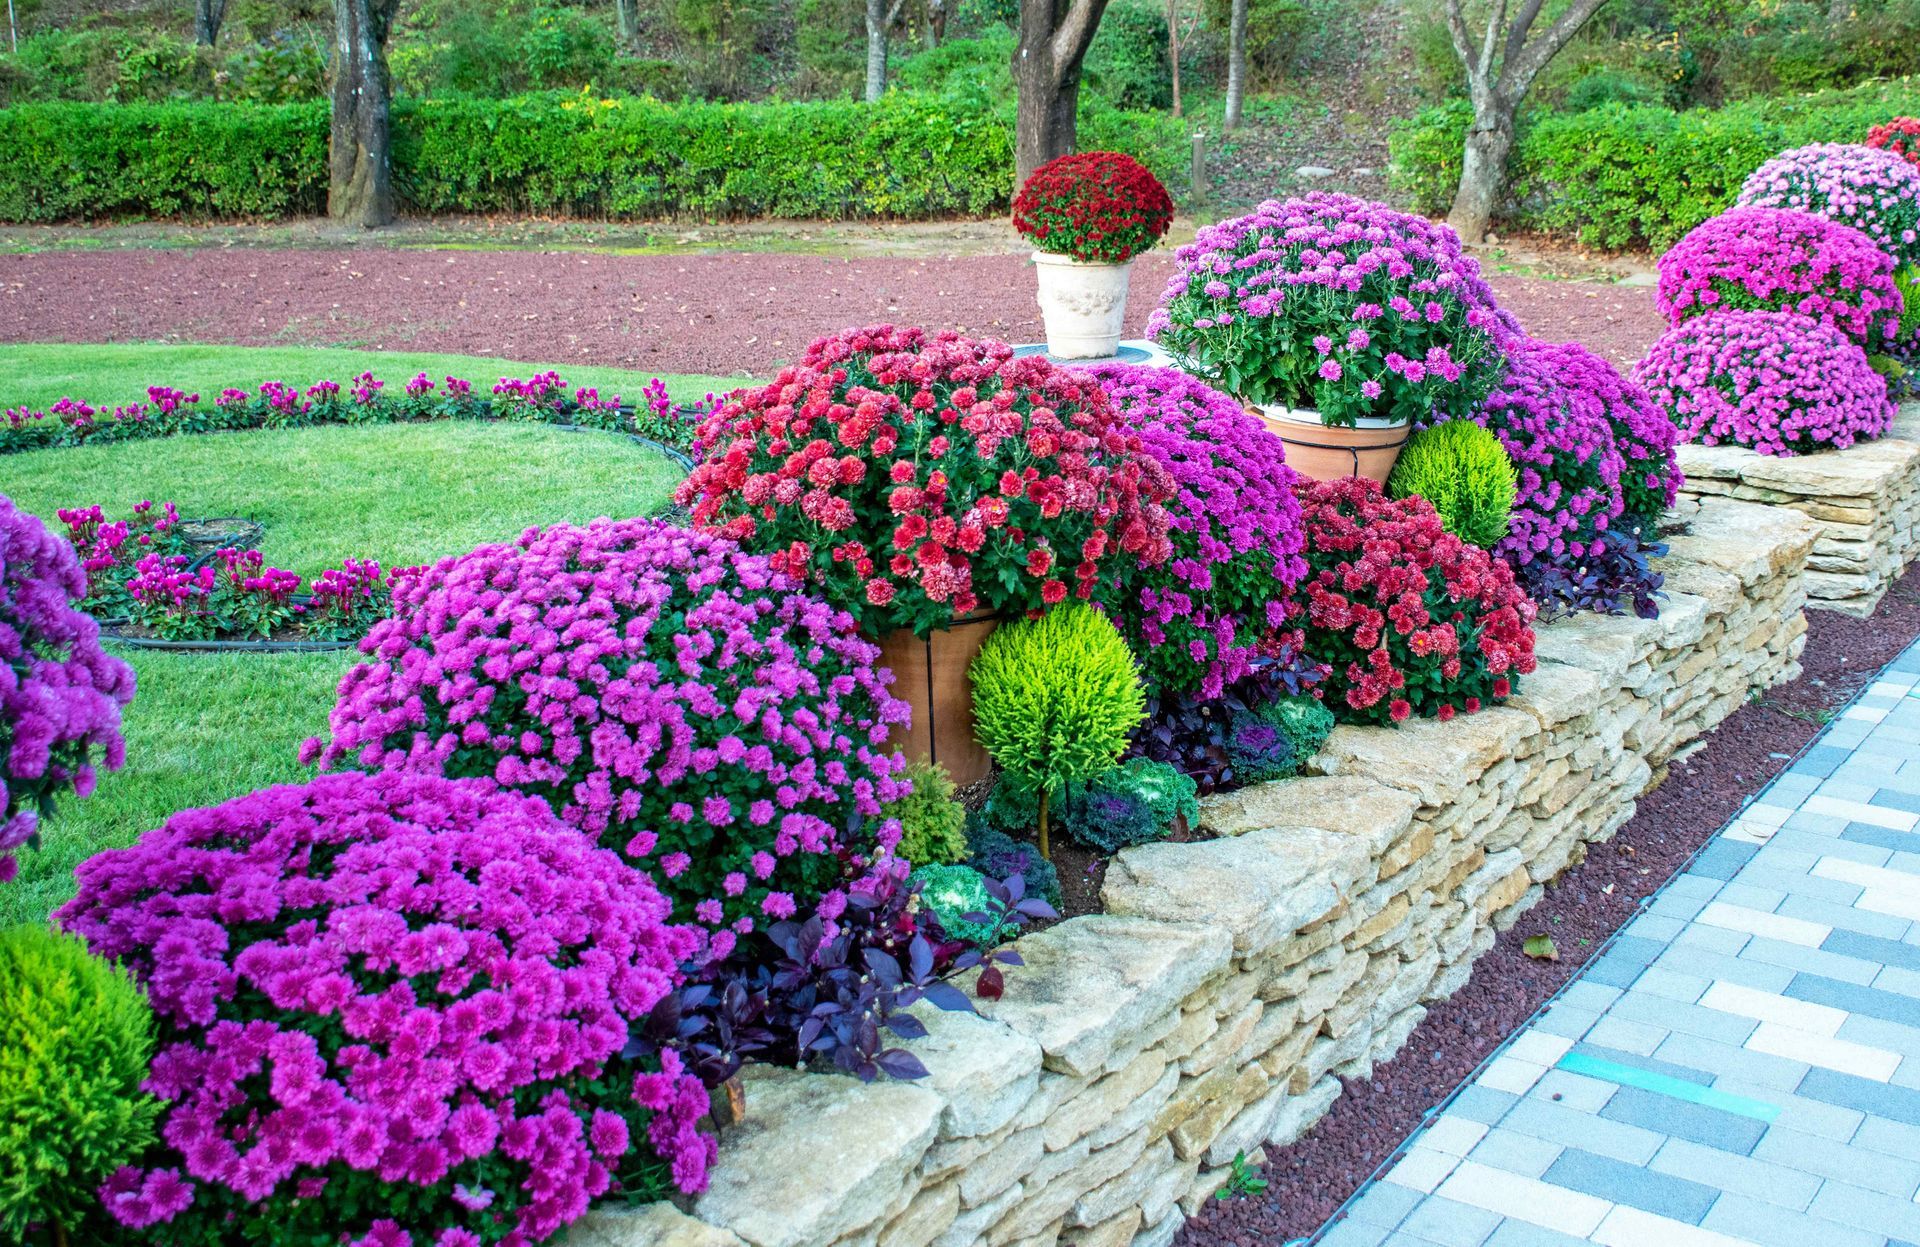 Beautiful Purple, red and green flowerbed surrounded by retaining wall